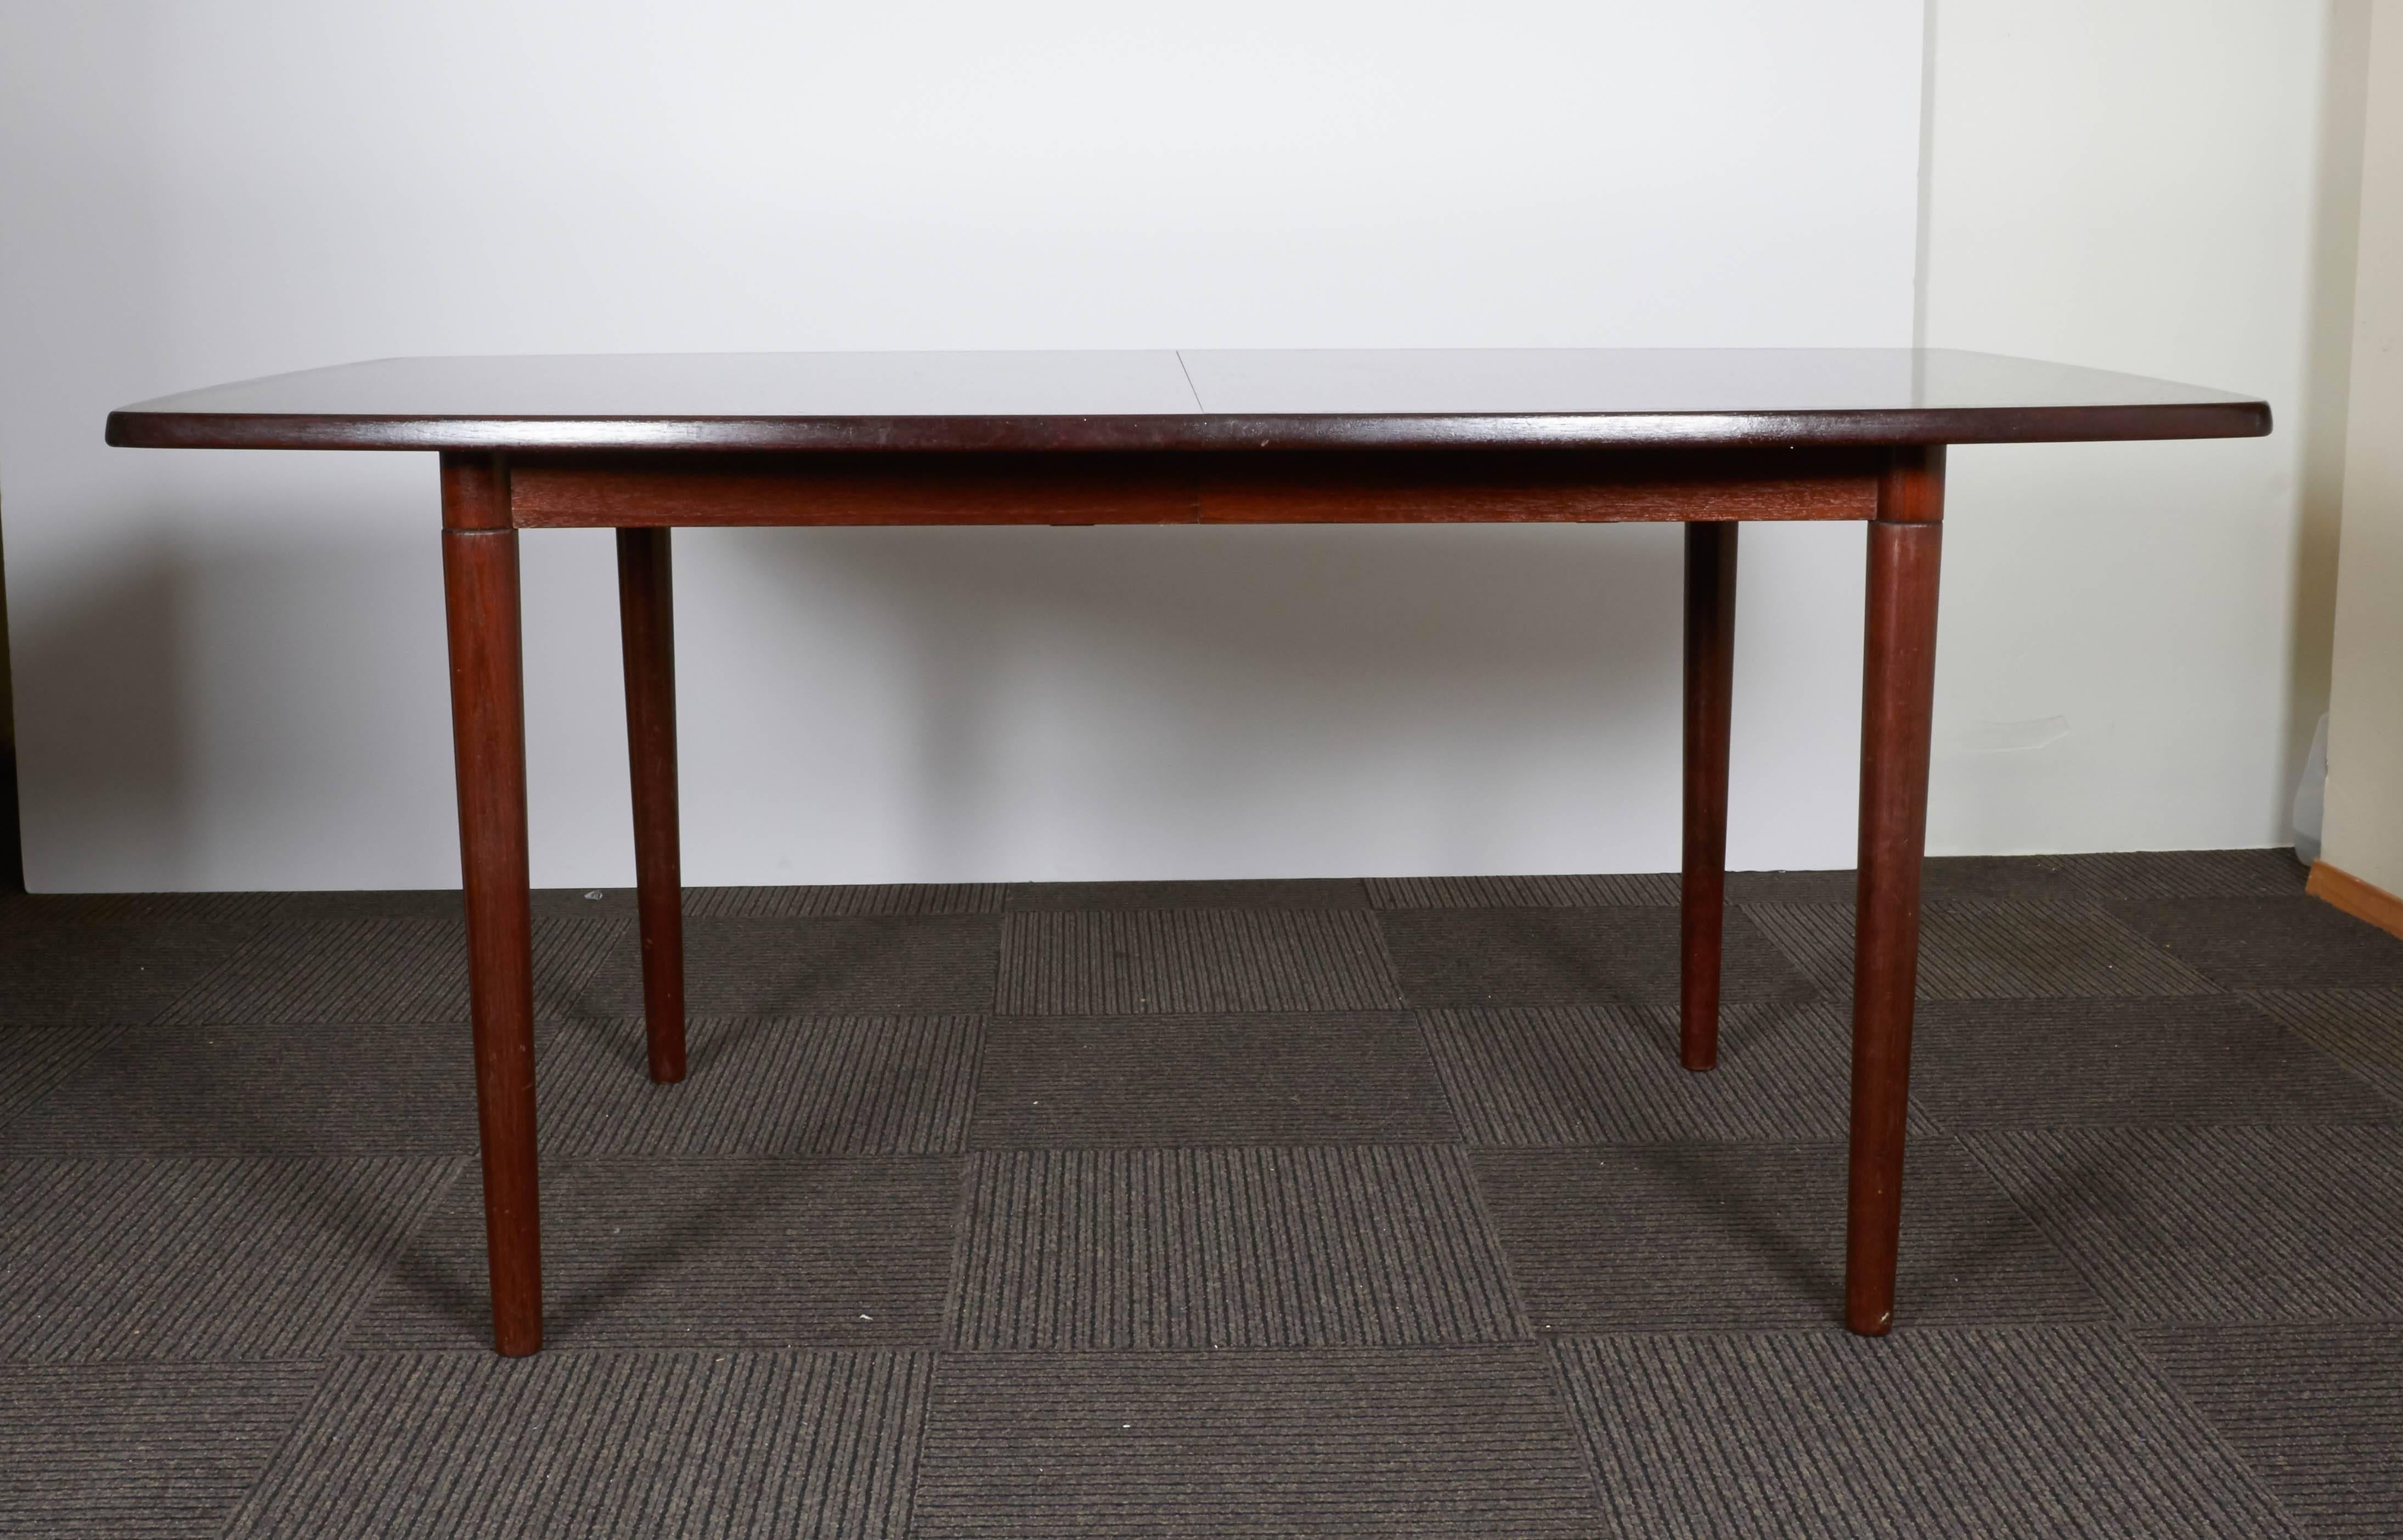 This 1960s Scandinavian modern style dining table by Niels Otto Møller, comes in beautifully polished rosewood with gently rounded sides and veneer detail to perimeter, on round tapered legs. Included are two extensions leaves, each 16.5